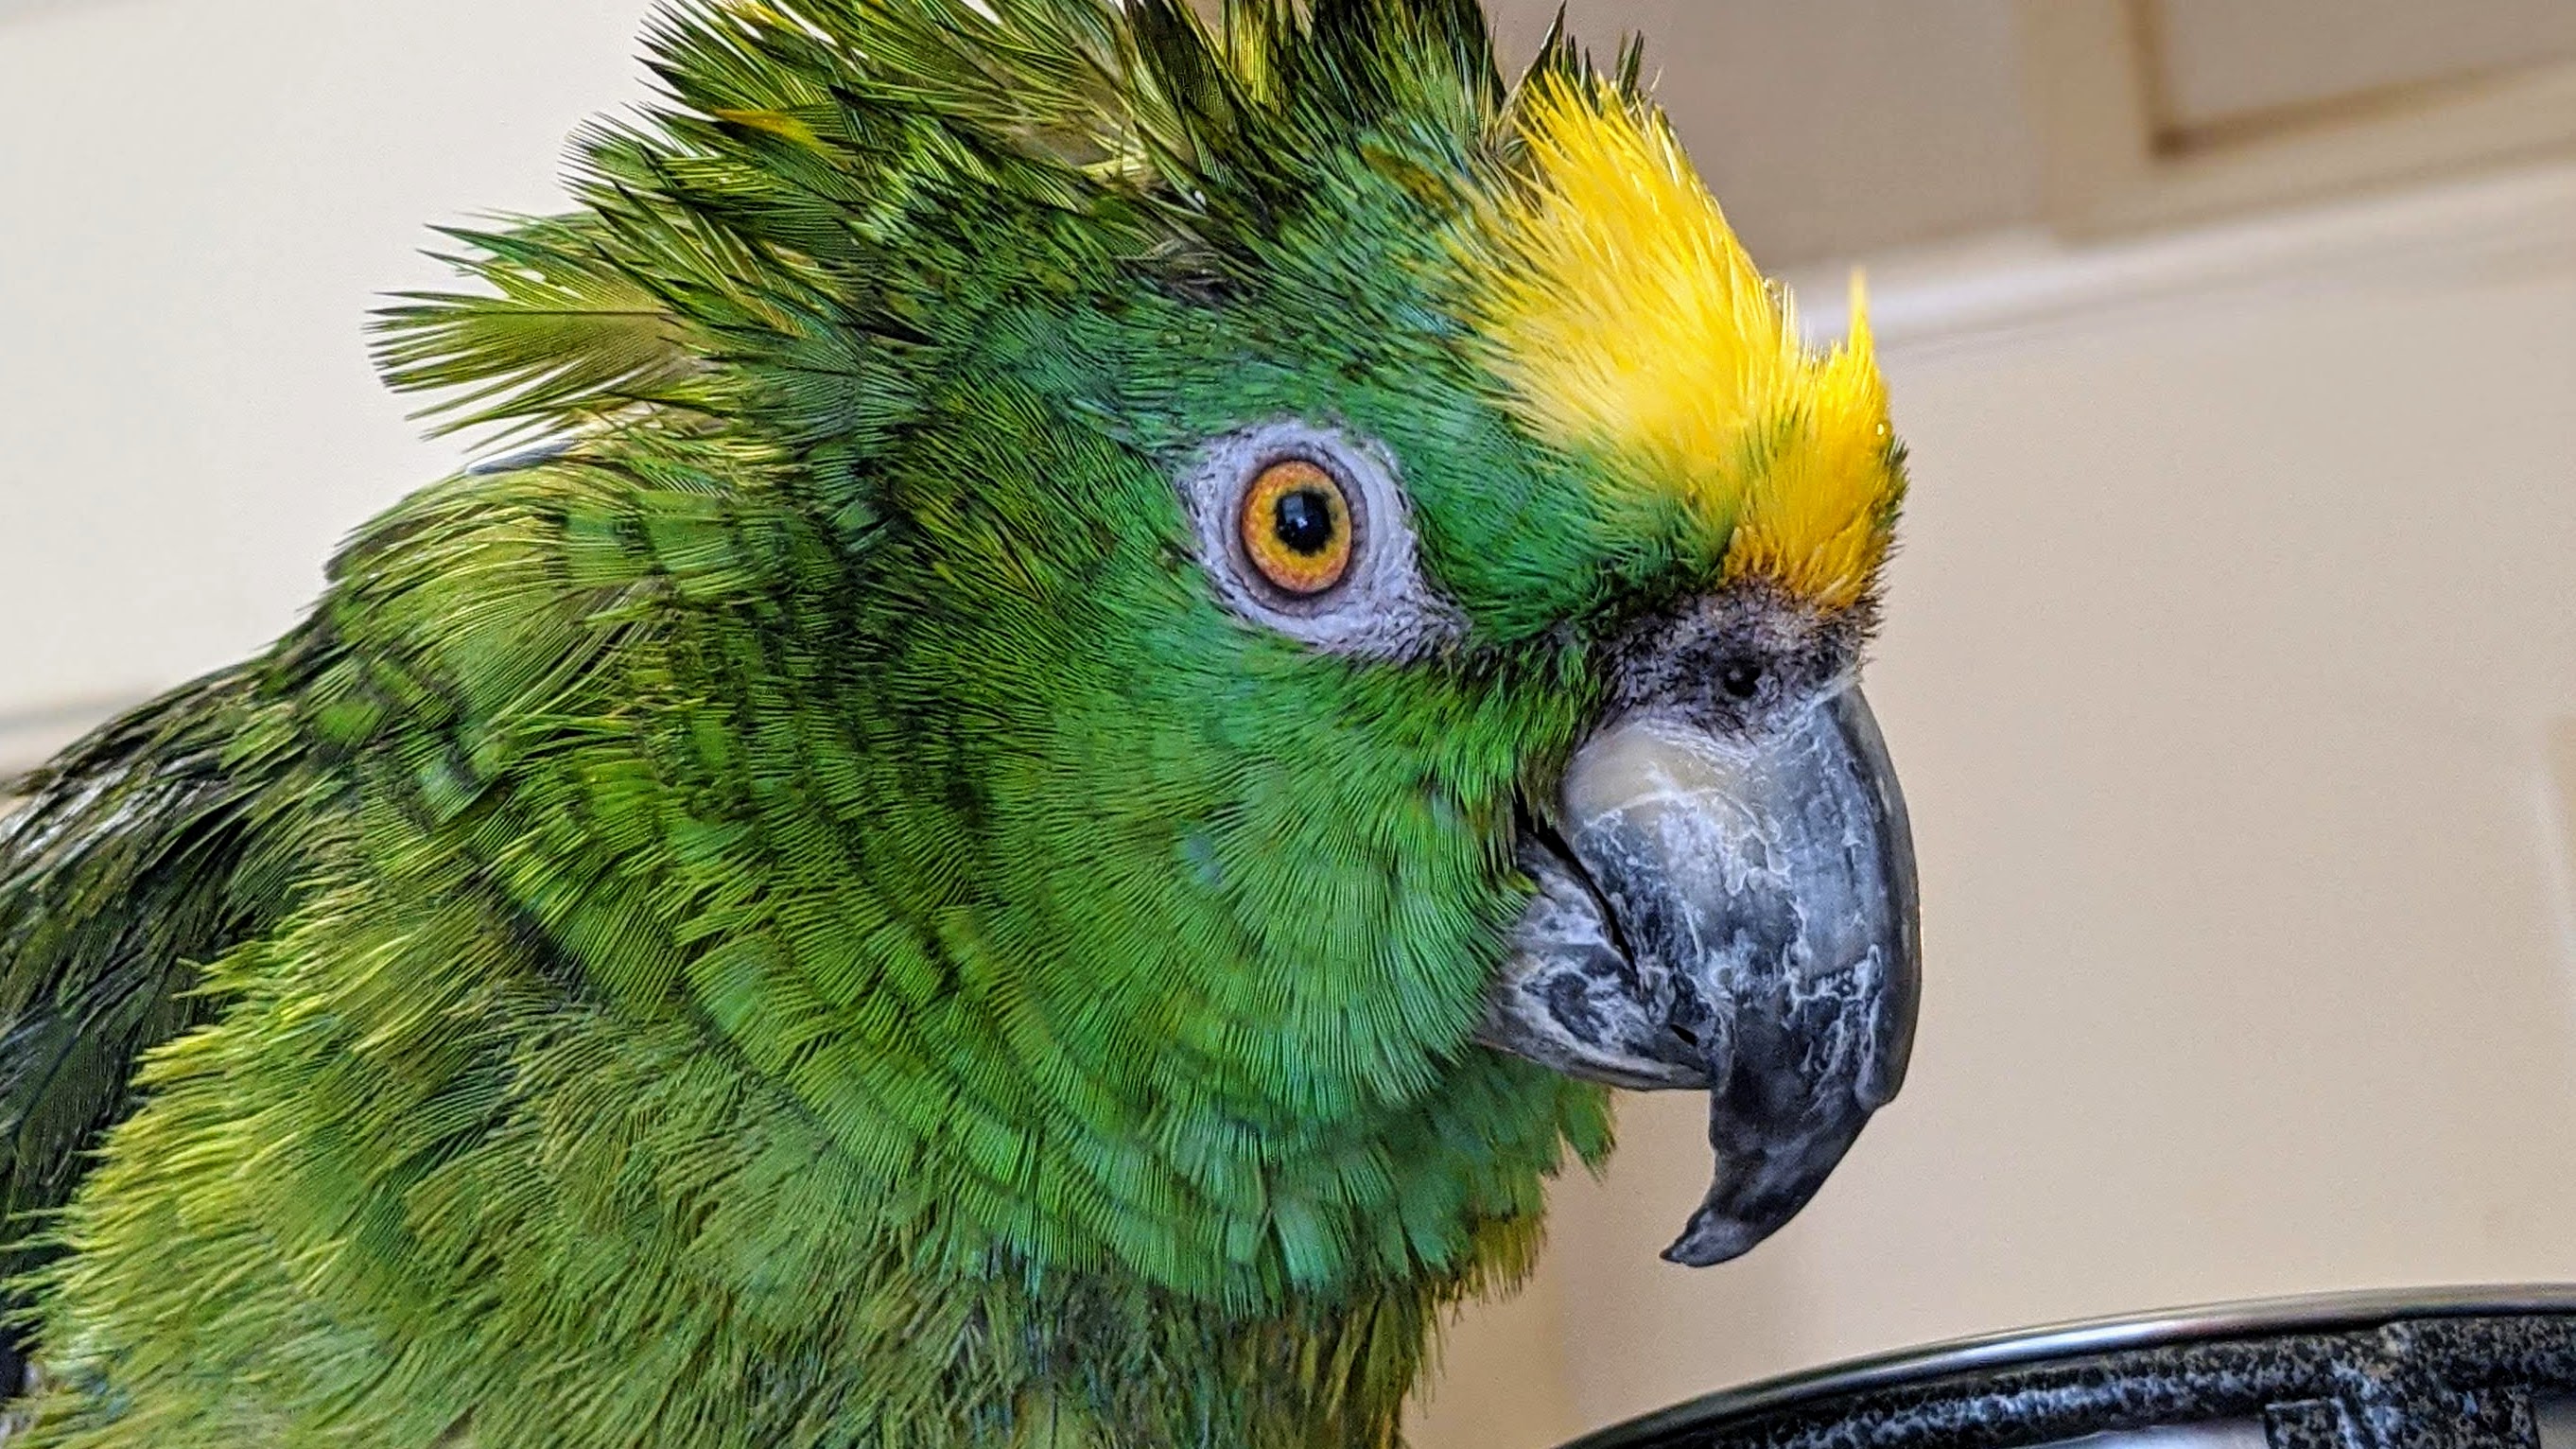 Pipi the silly parrot